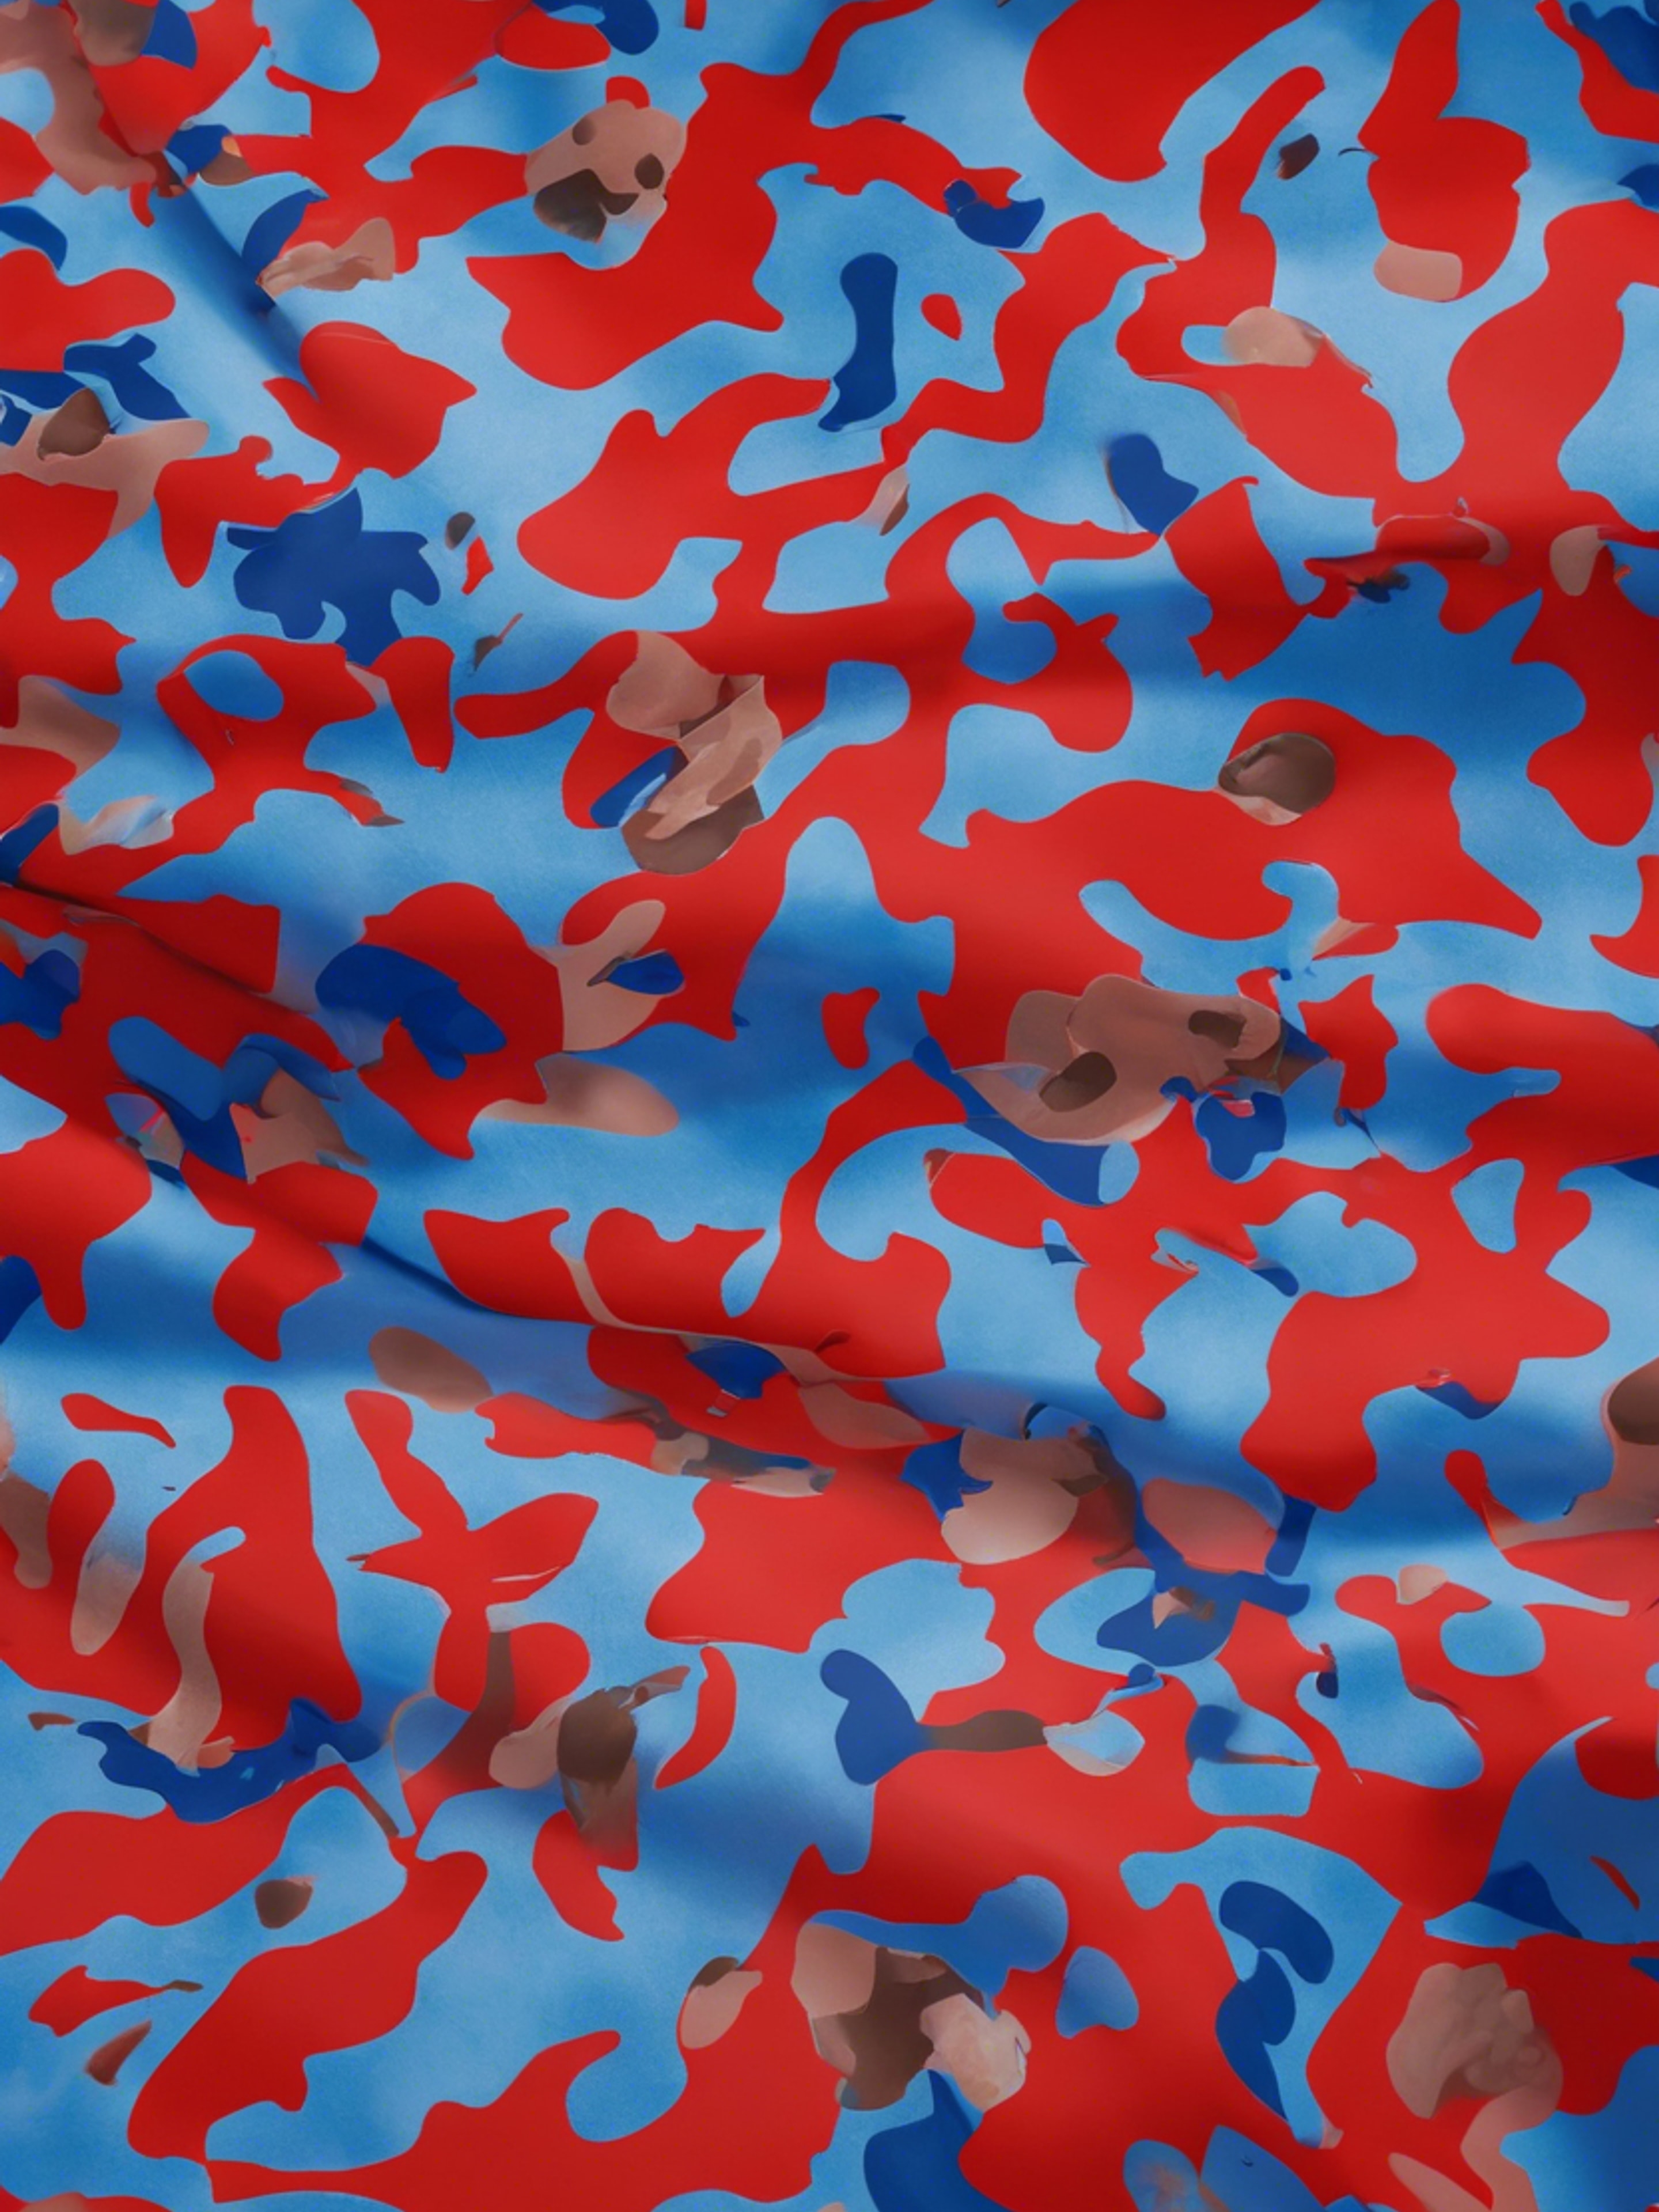 High-quality red and blue camouflage wrapping paper. Валлпапер[4b47f7d82a744ca8b045]